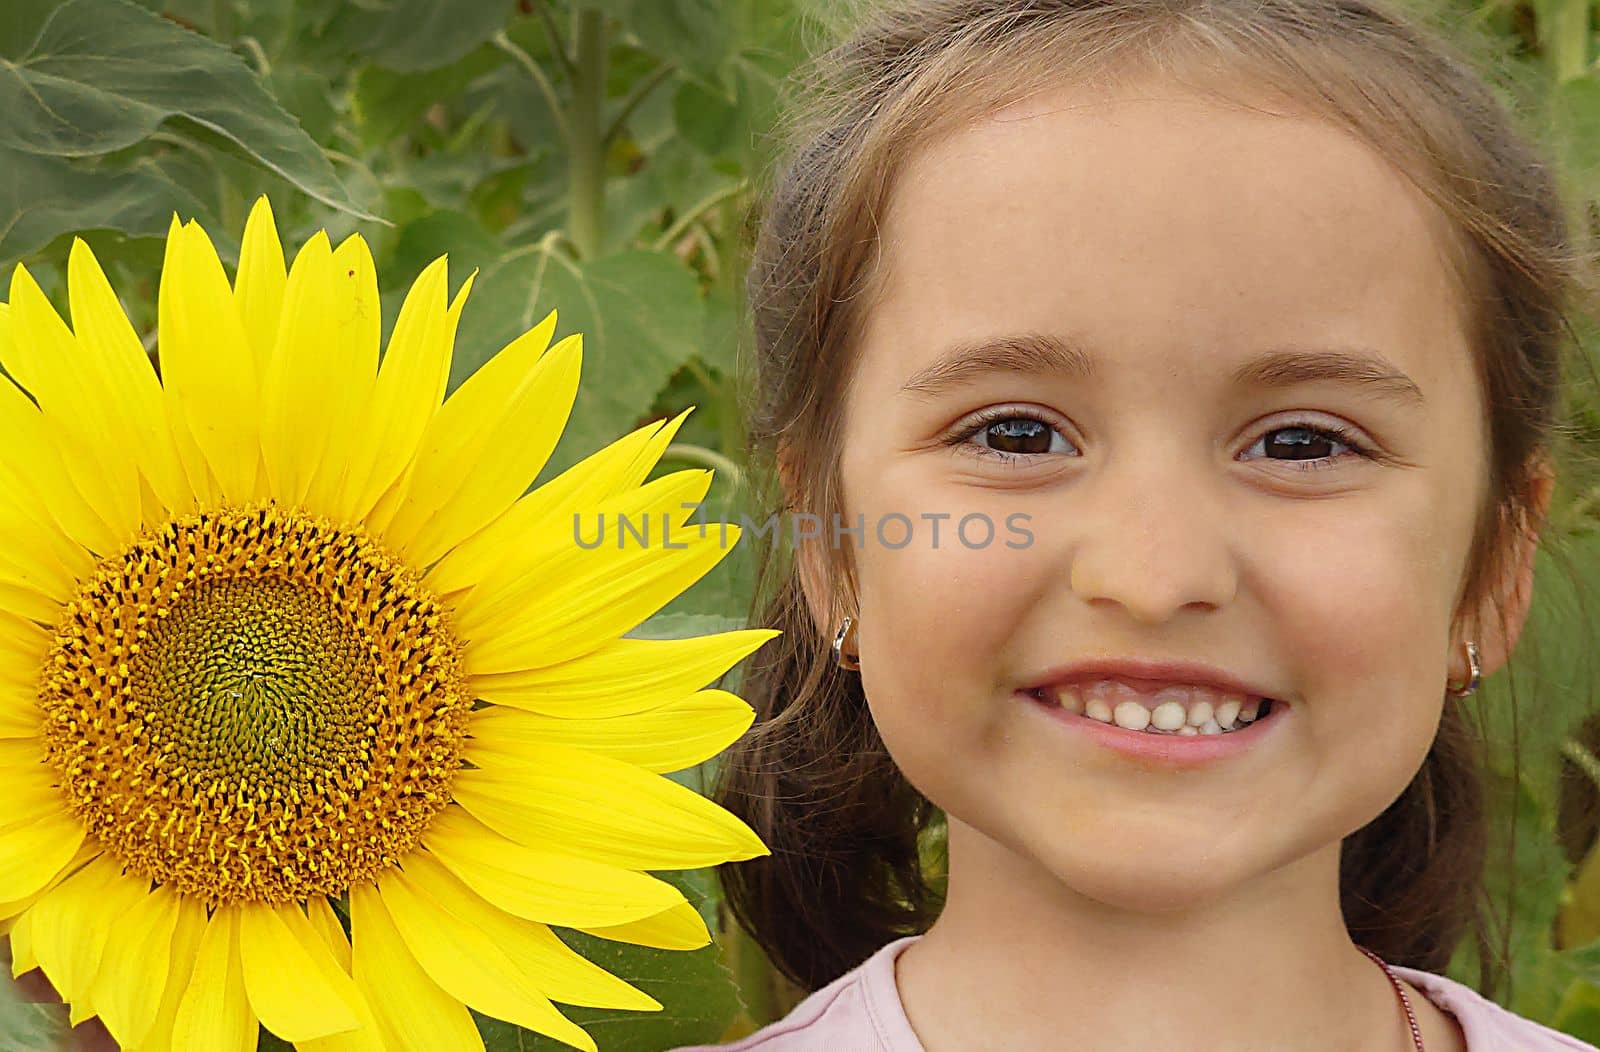 A girl with a smile stands next to a yellow sunflower by Mastak80